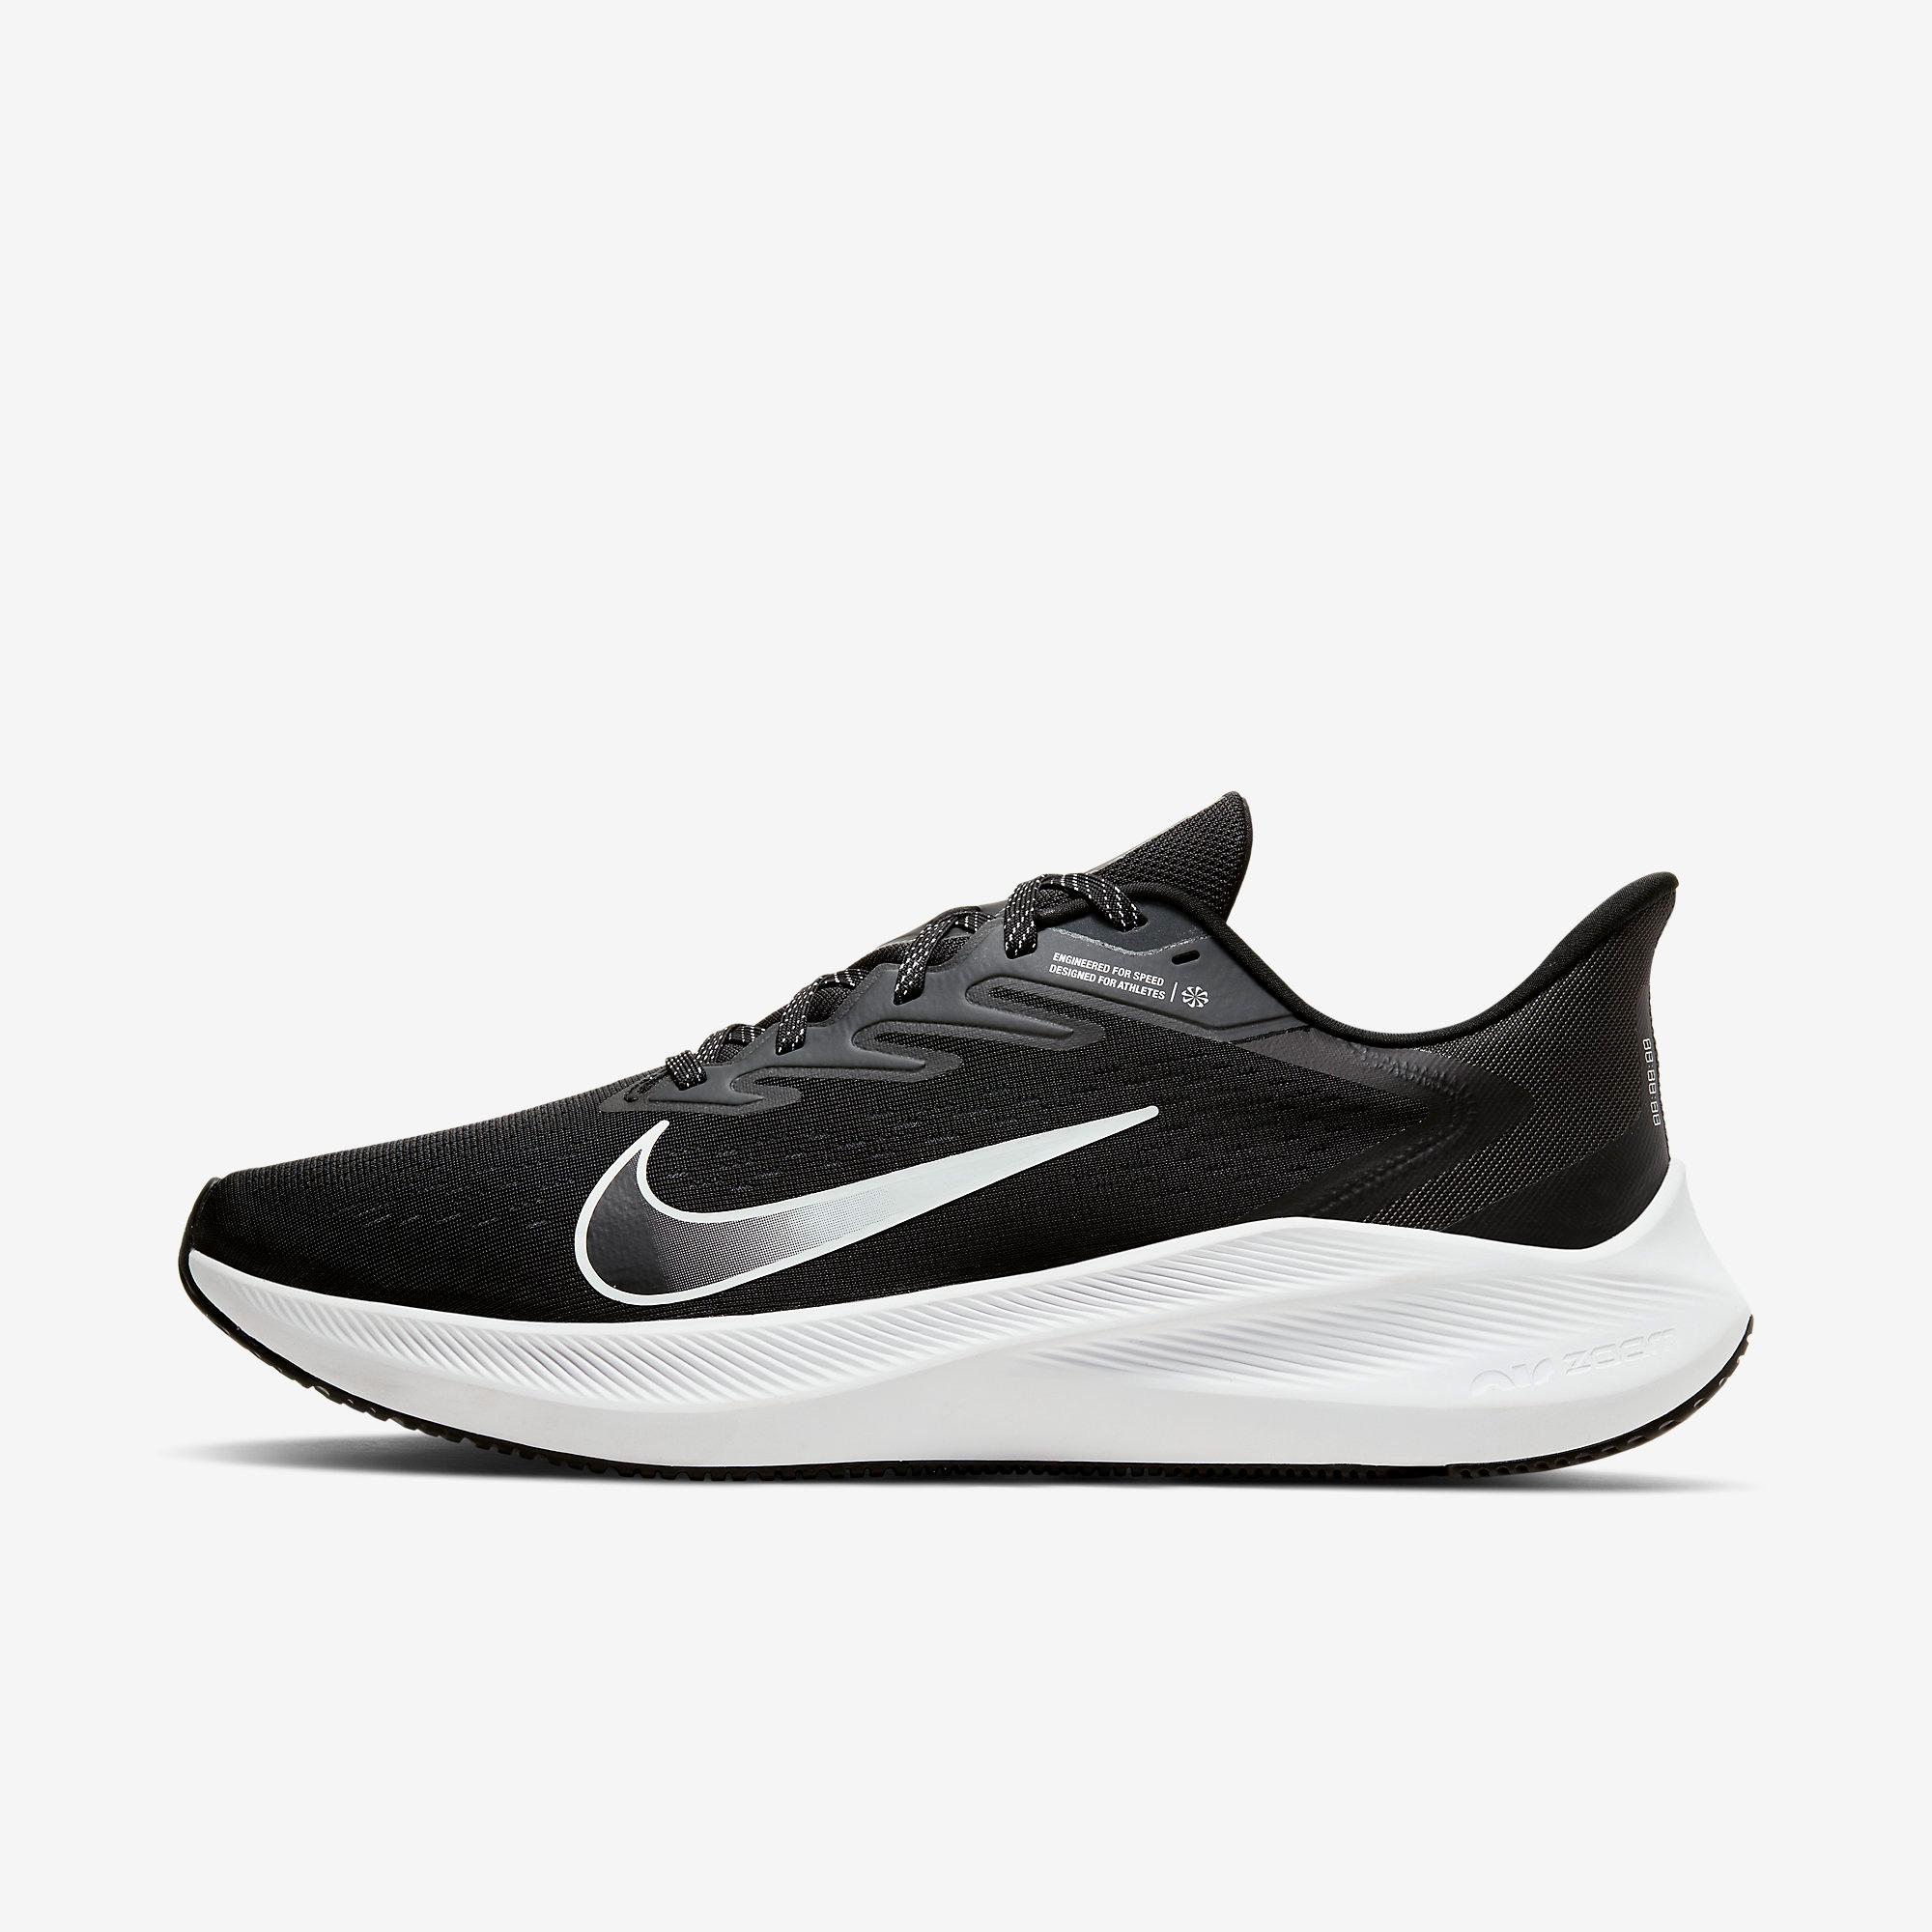 Nike Mens Air Zoom Winflow 7 Running Shoes - Black/Anthracite ...